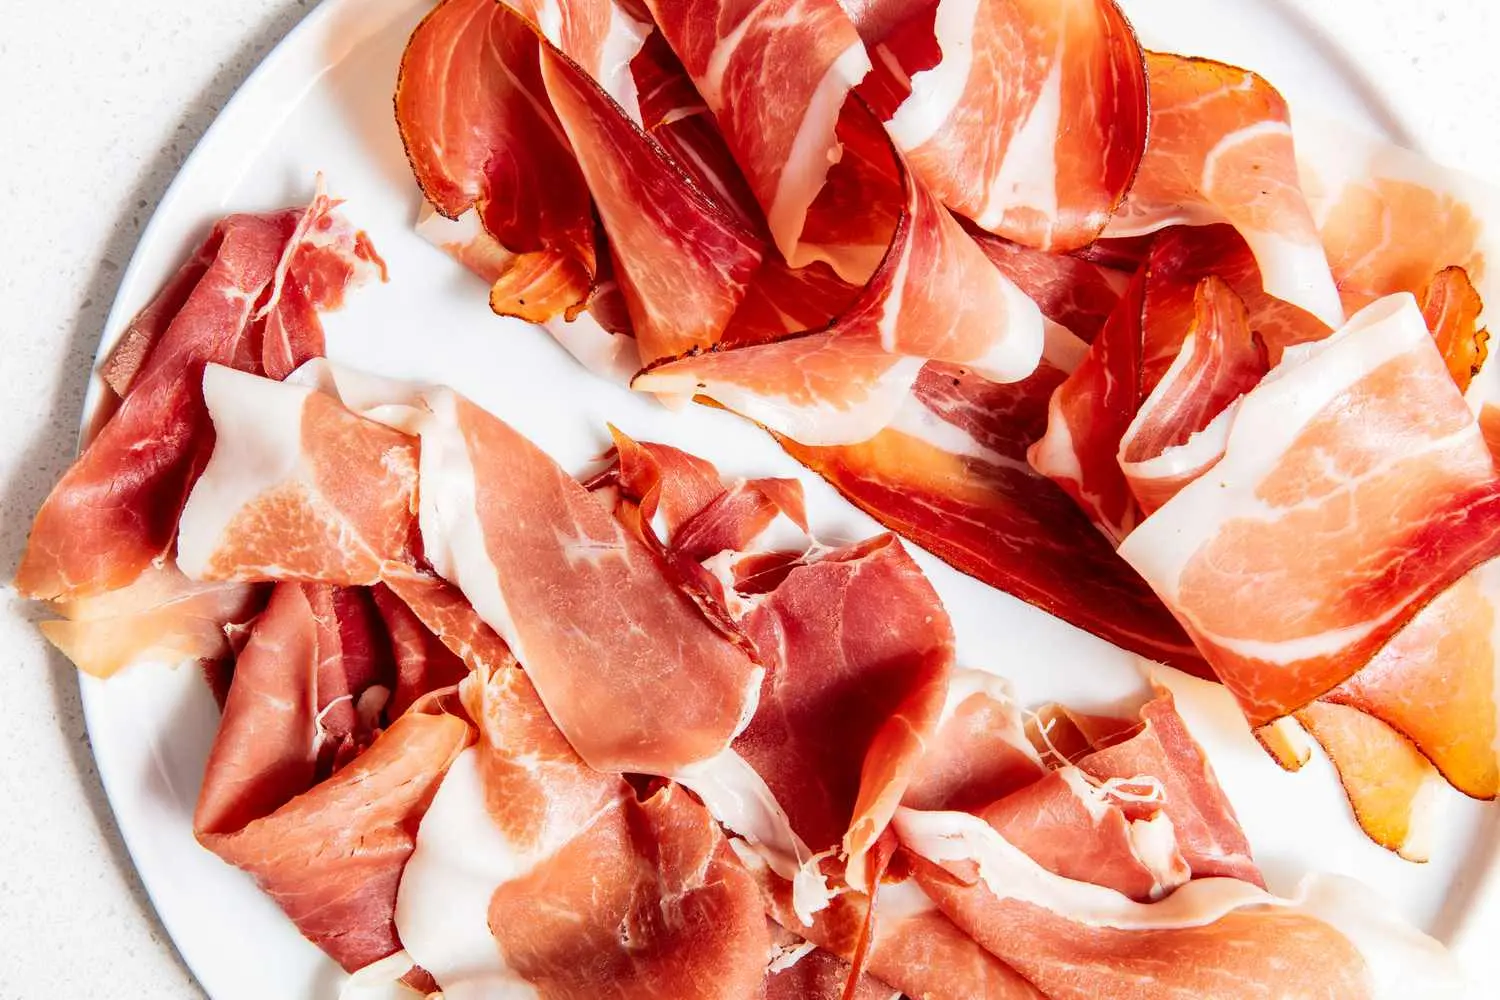 spanish smoked meat - What is prosciutto called in Spain